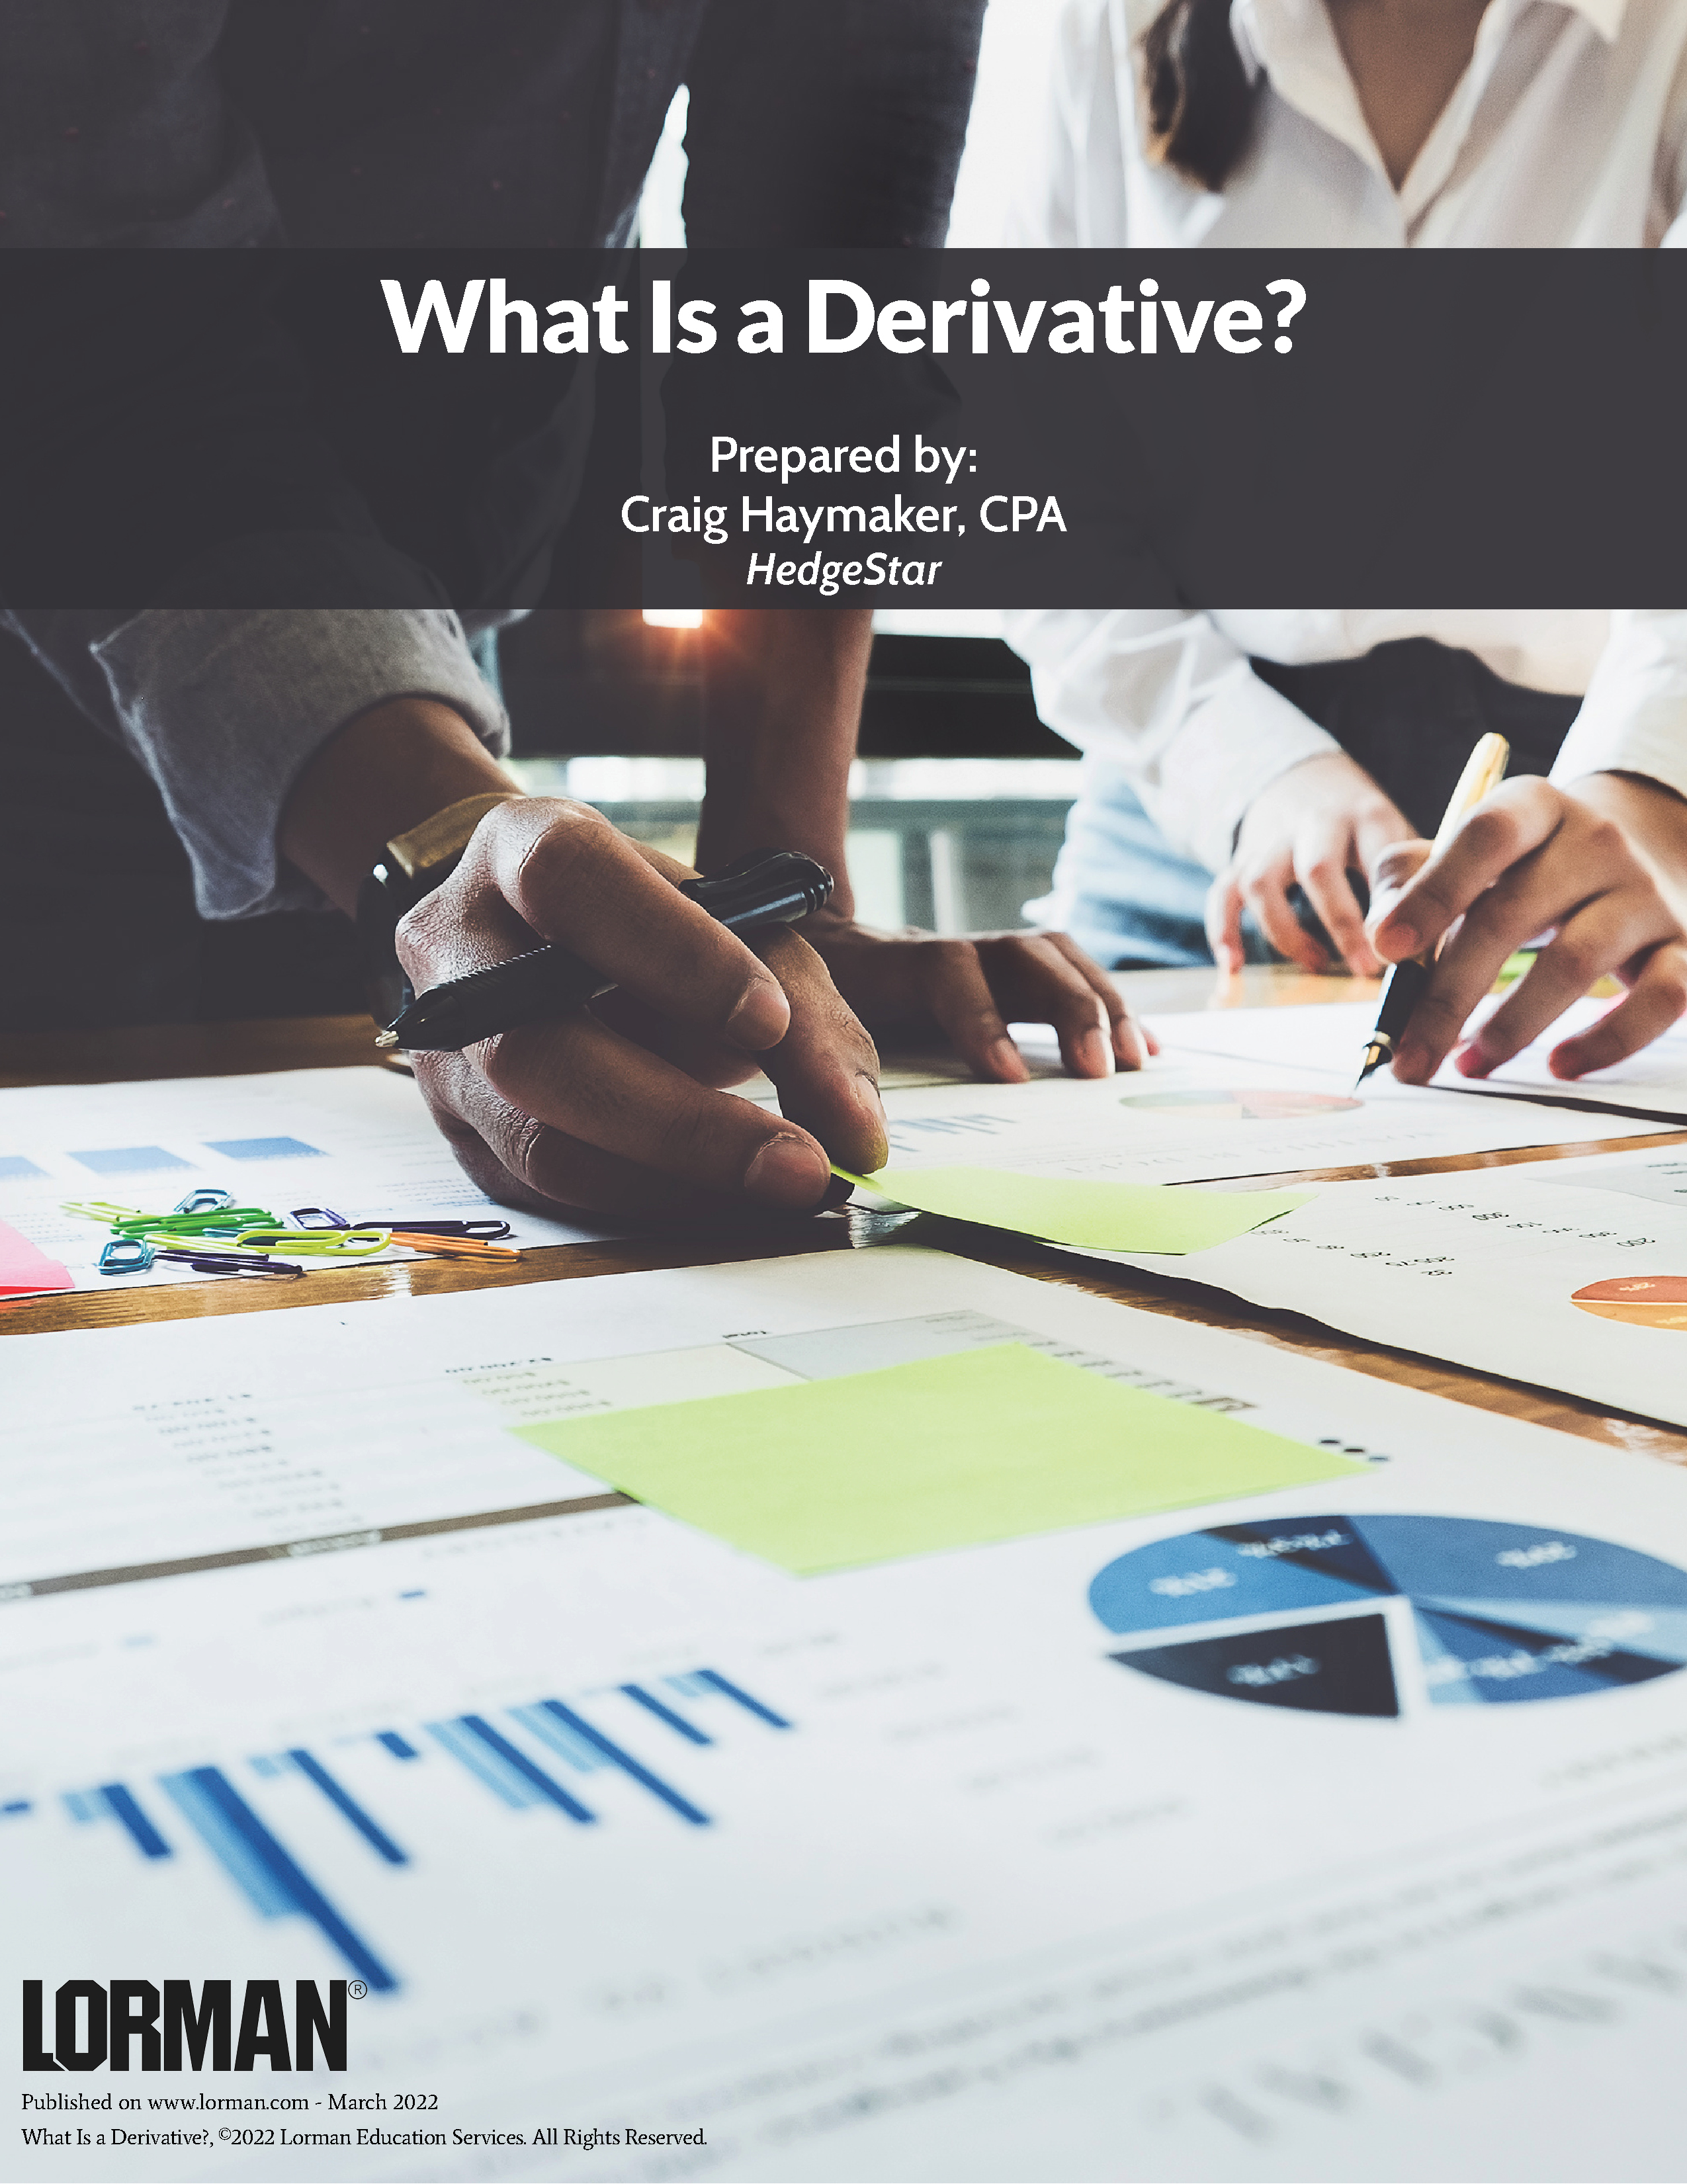 What Is a Derivative?